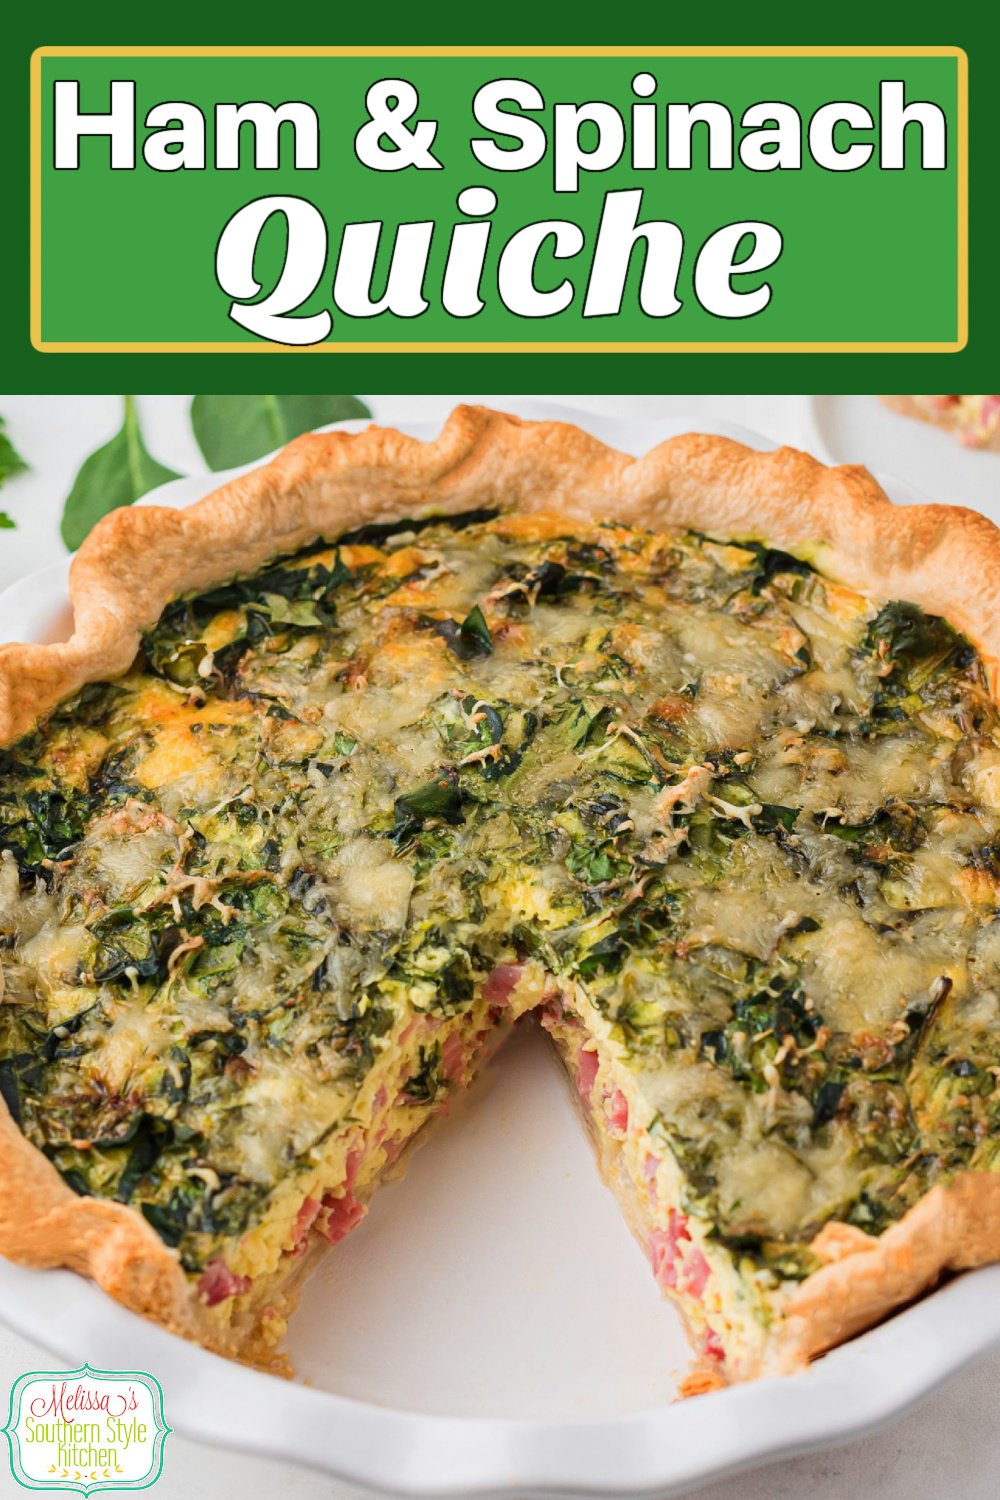 Start your day with this flavorful Ham and Spinach Quiche #spinachquiche #hamandspinachquiche #bestquicherecipes #leftoverhamrecipes #ham #spinachrecipes #quiche #brunch #breakfast #lunch #holidaybrunch #southernfood #southernrecipes via @melissasssk